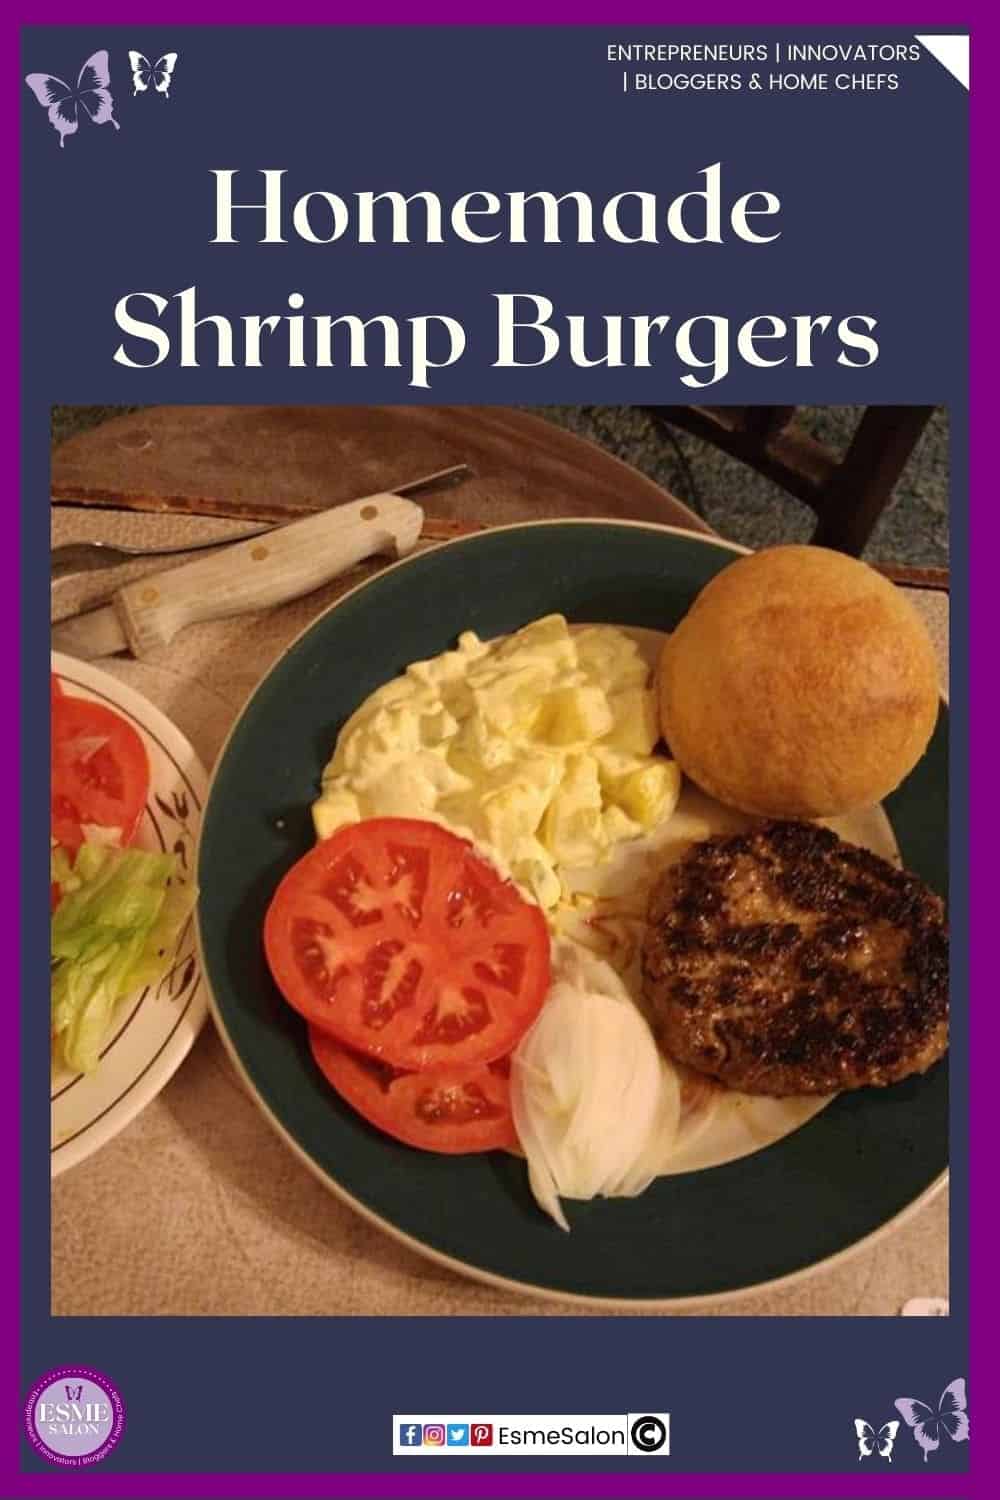 an image of a dark round serving plate with a Homemade Shrimp Burger, a bun, tomato and eggs